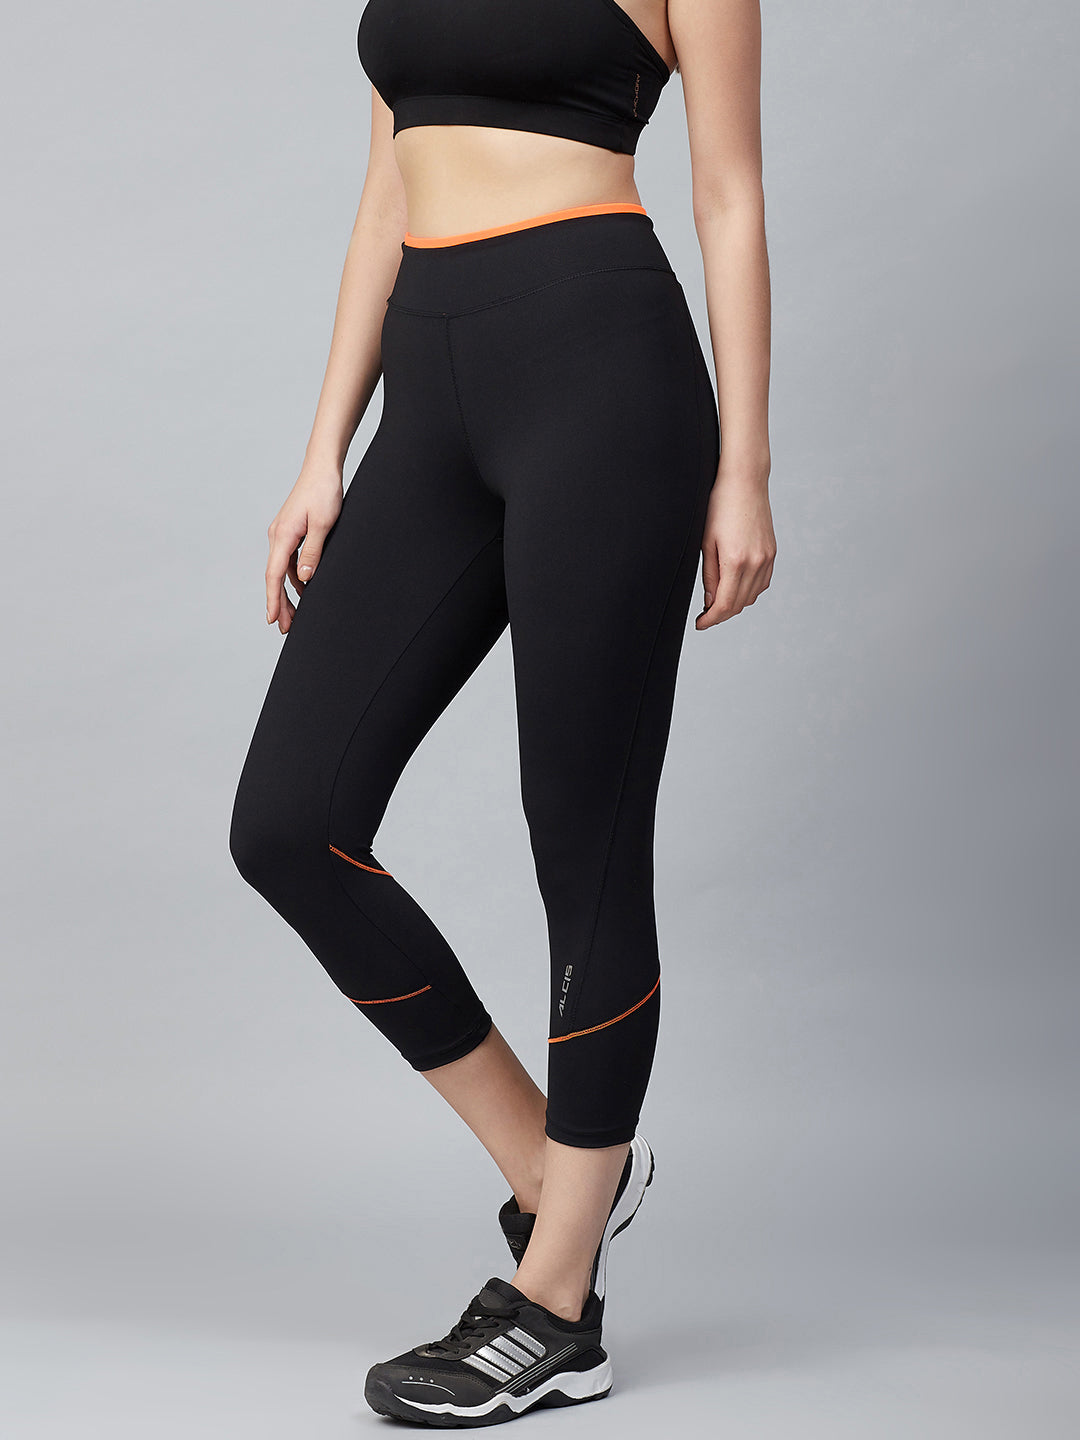 Alcis Women Black Solid Cropped Running Tights